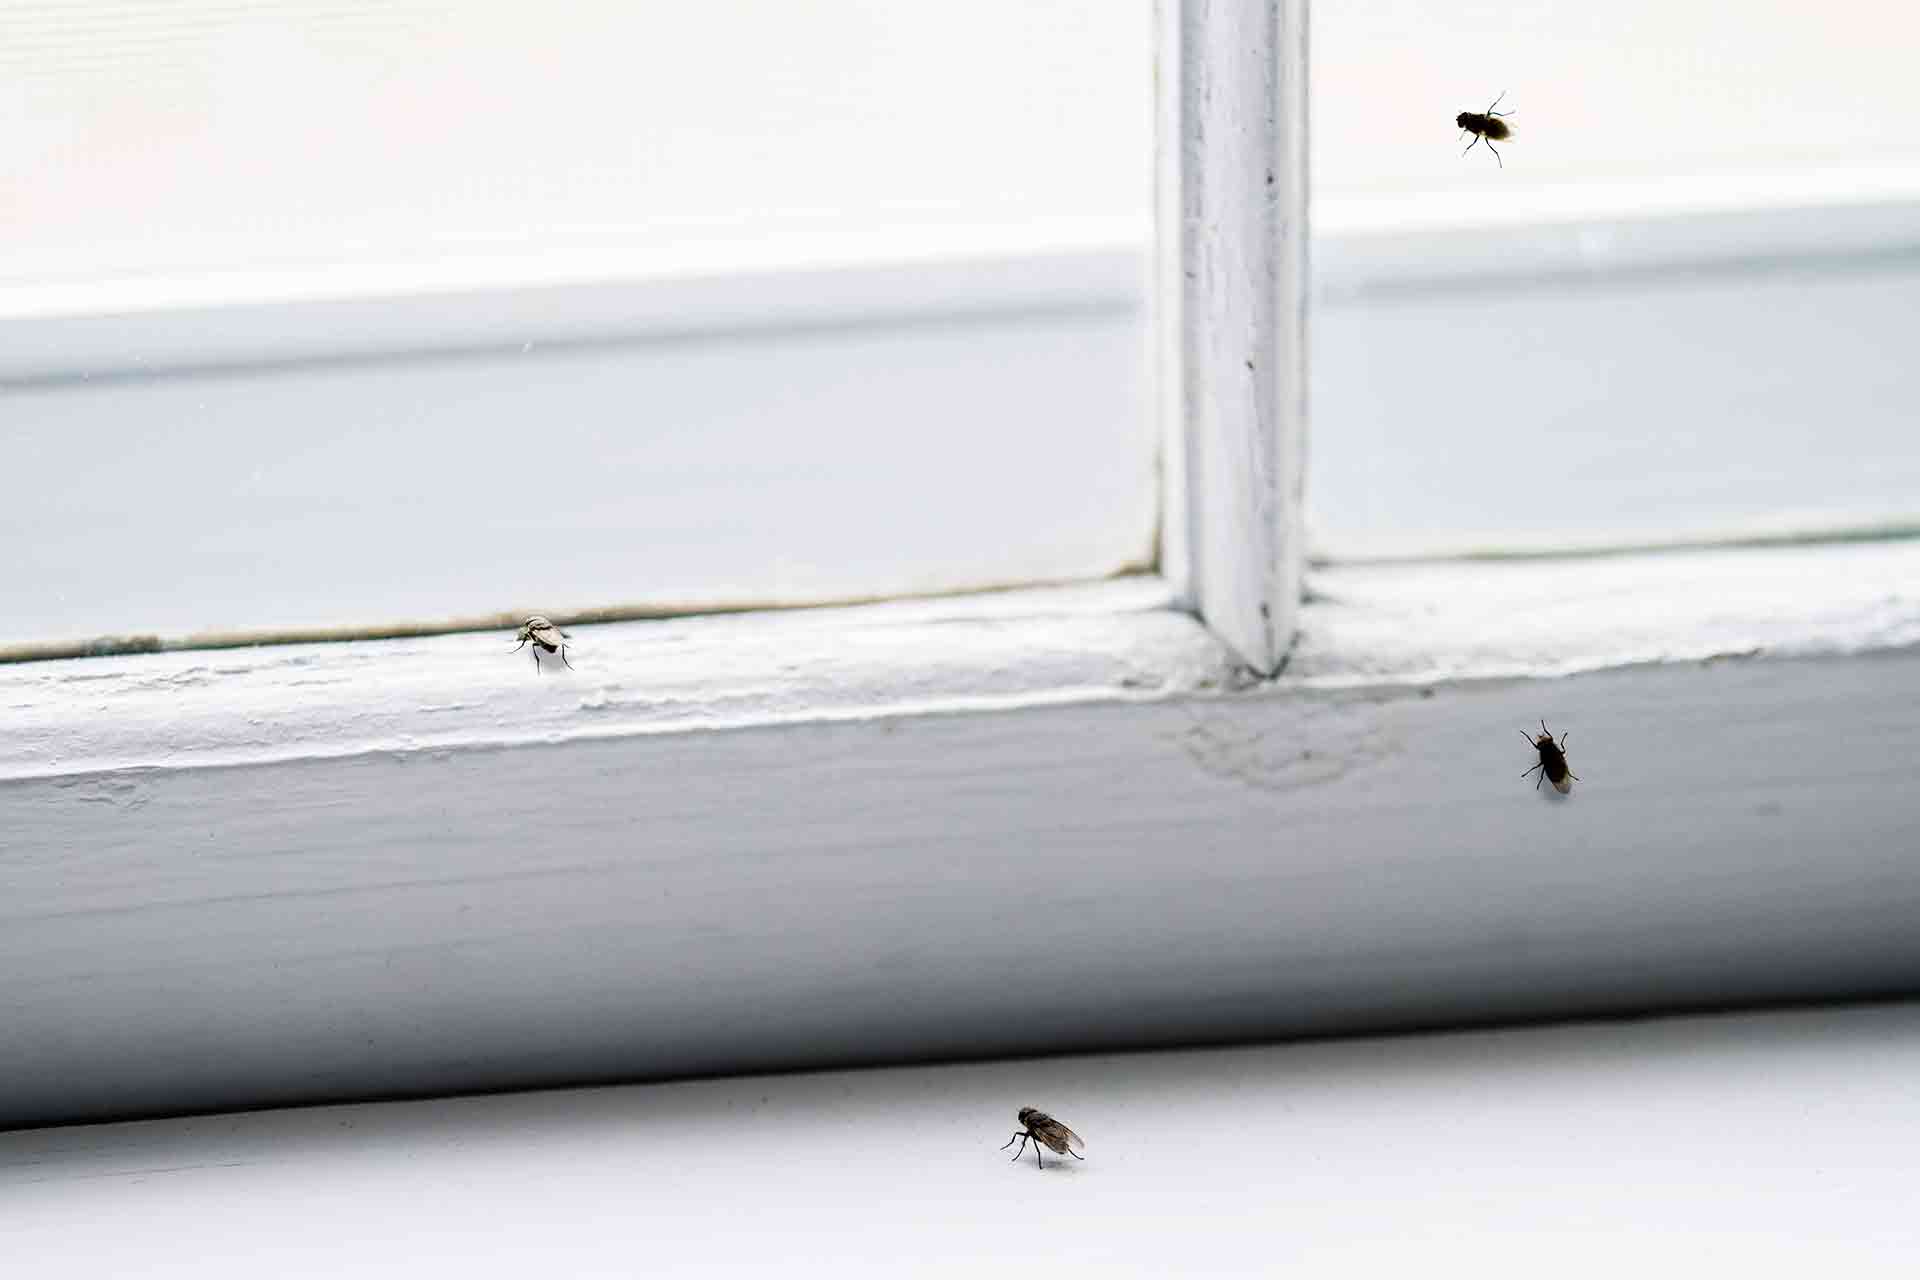 https://www.checkatrade.com/blog/wp-content/uploads/2021/04/Feature-How-to-get-rid-of-flies-in-the-house.jpg